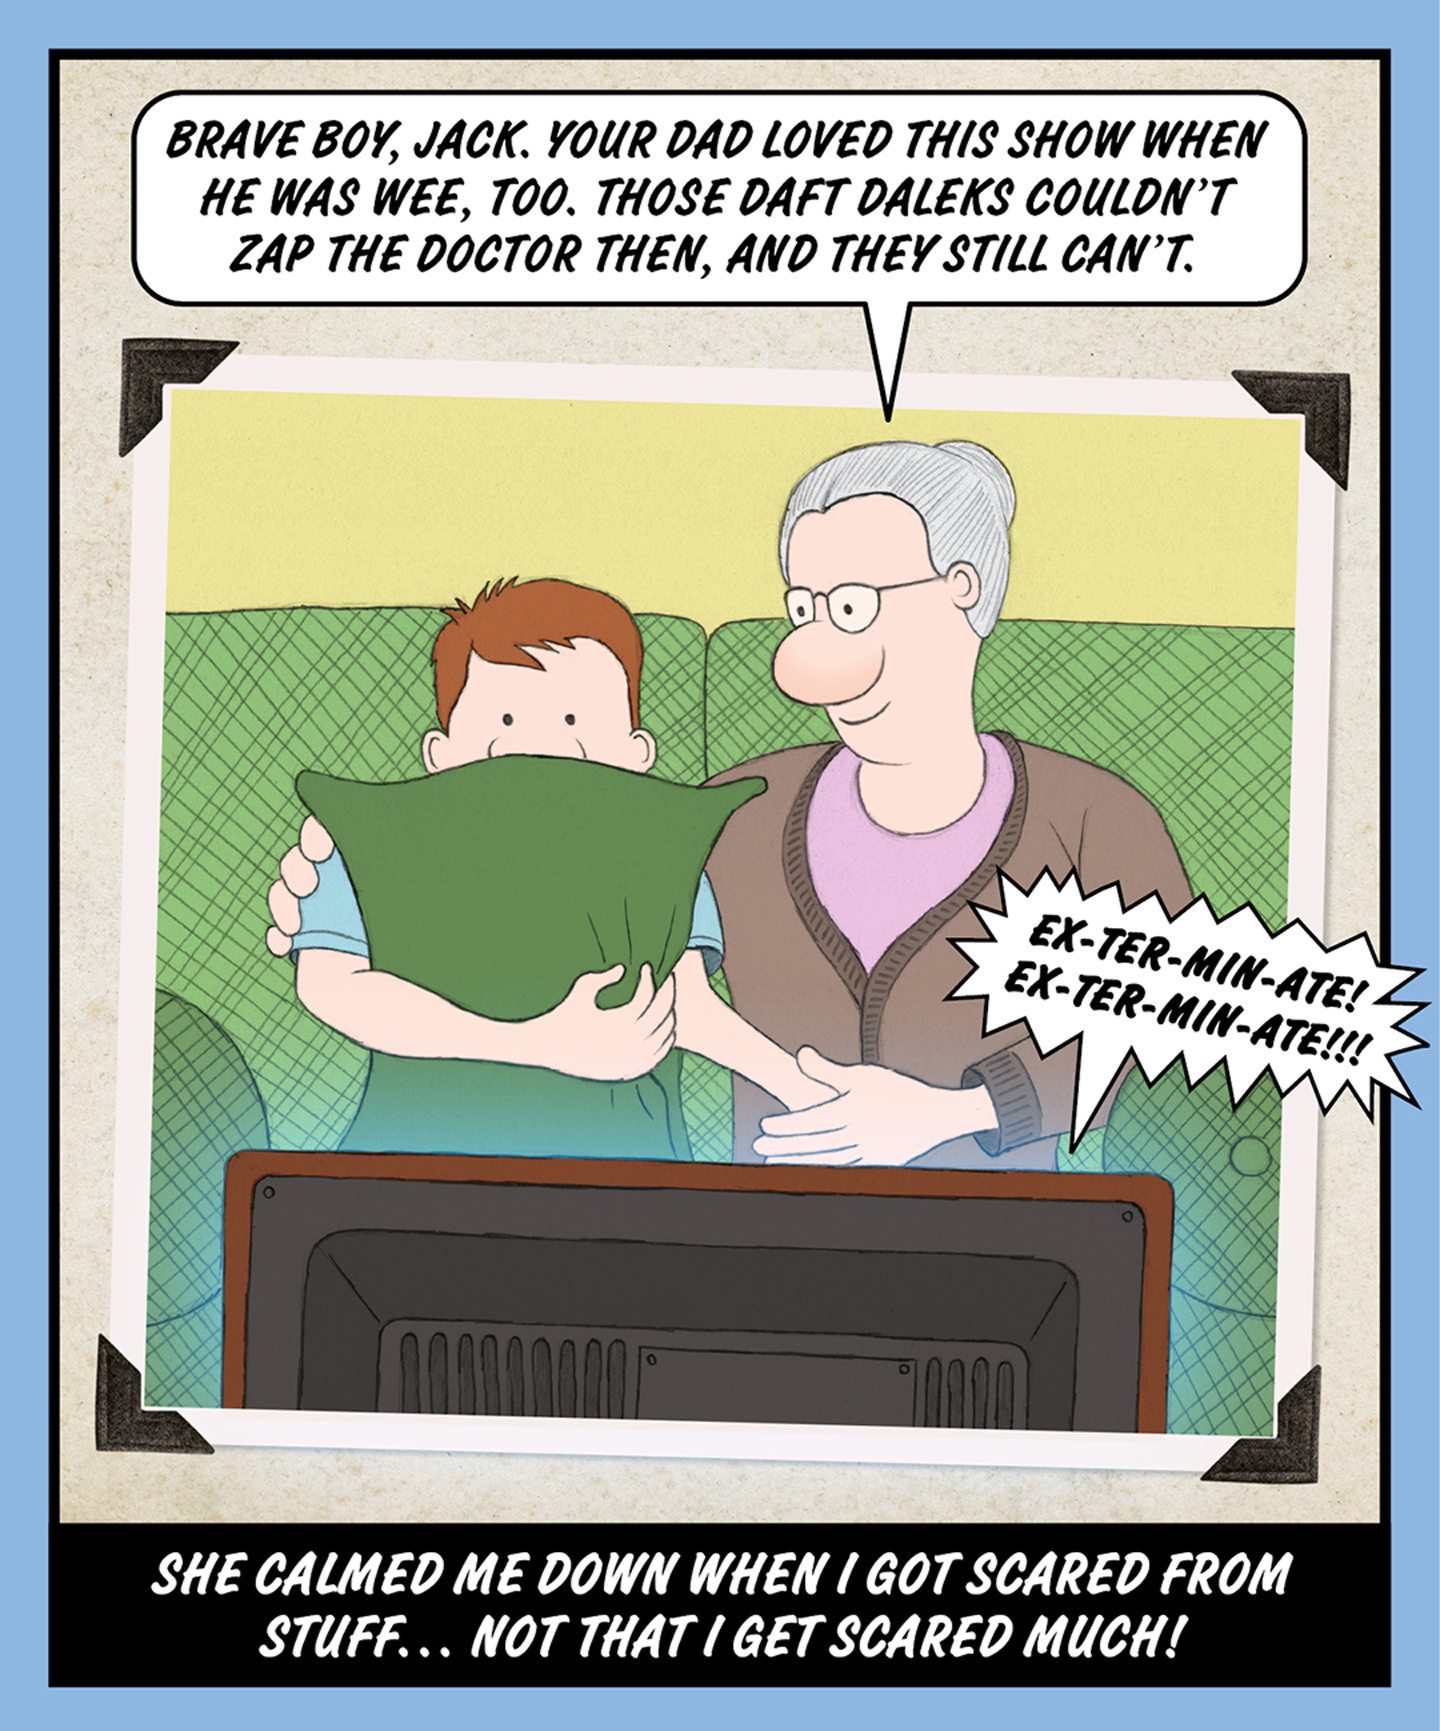 A comic illustration of a granny sitting watching TV with a teenage boy. The speech bubble from the granny says: BRAVE BOY, JACK. YOUR DAD LOVED THIS SHOW WHEN HE WAS WEE, TOO. THOSE DAFT DALEKS COULDN'T ZAP THE DOCTOR THEN, AND THEY STILL CAN'T.
The words below the image read: SHE CALMED ME DOWN WHEN I GOT SCARED FROM STUFF… NOT THAT I GET SCARED MUCH!